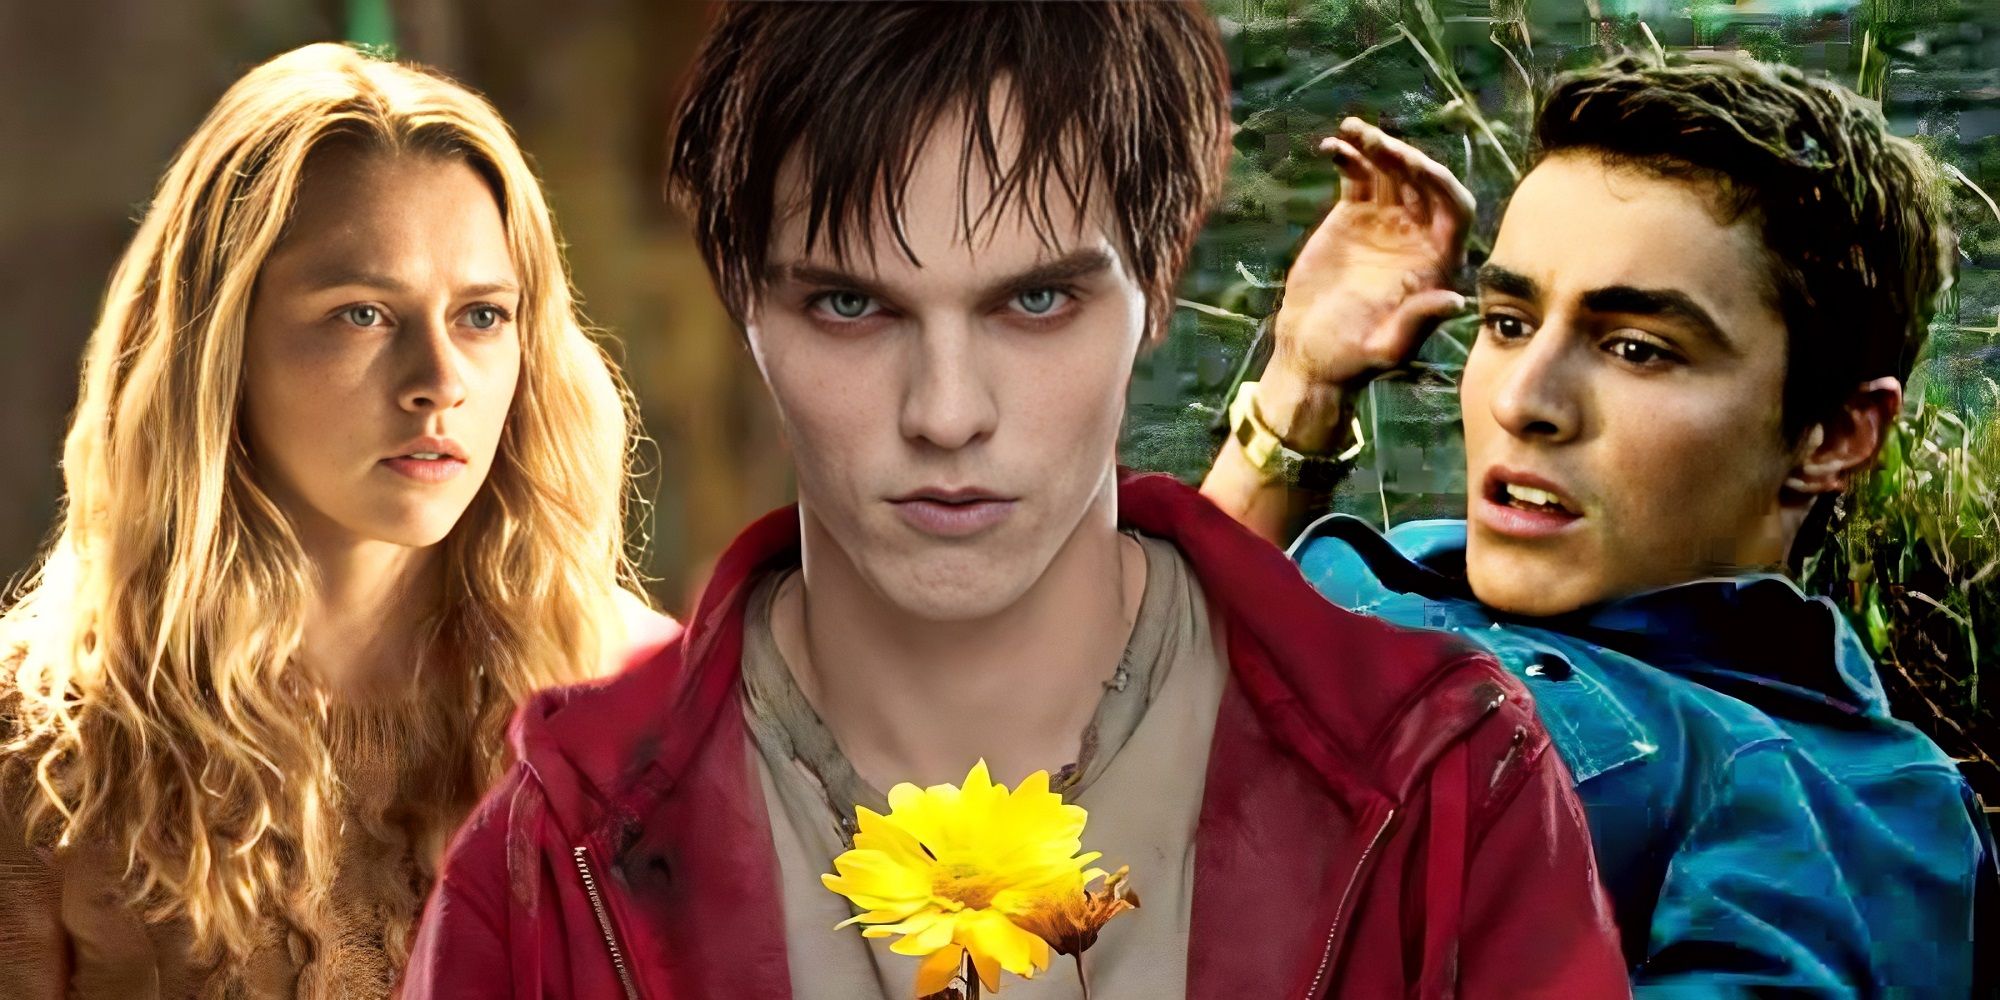 Nicolas Hoult as Zombie corpse in Warm Bodies